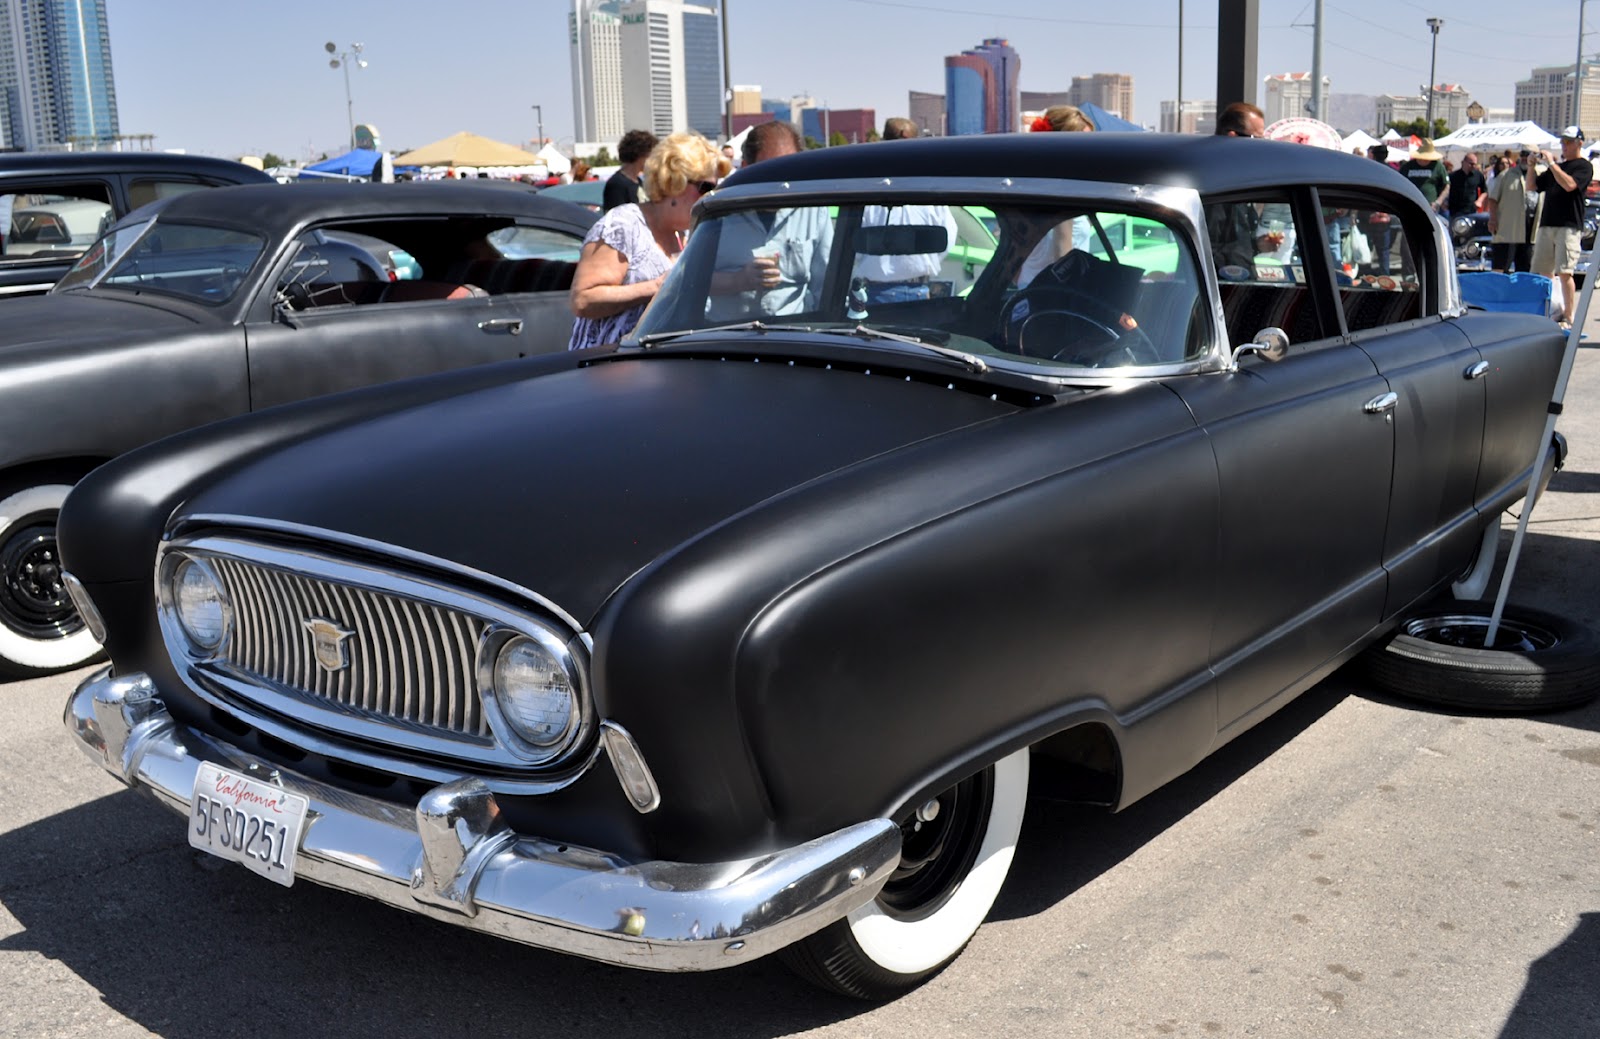 Just A Car Guy: Viva Las Vegas was a cool car show, my first time there, and a lot of unexpected ...